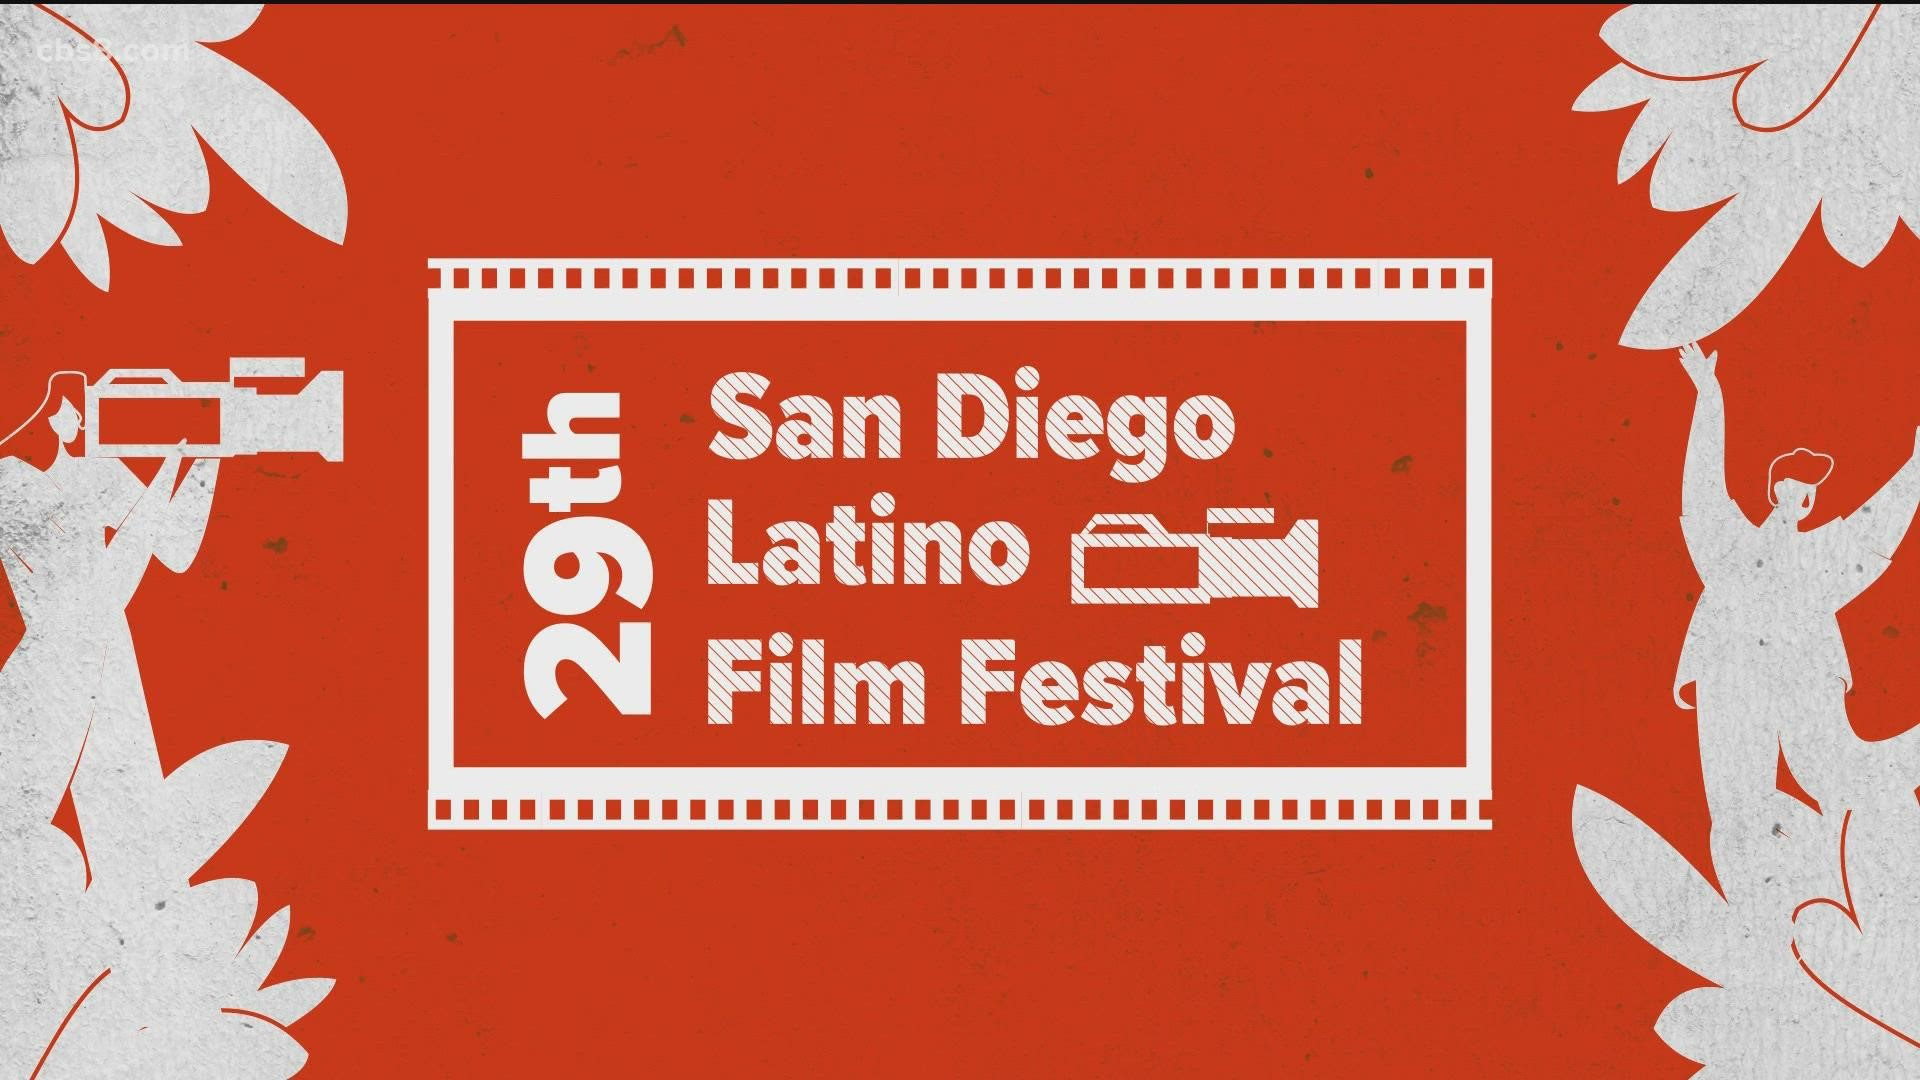 The ten day event will bring hundreds of movies, actors and directors from around Latin America to San Diego.